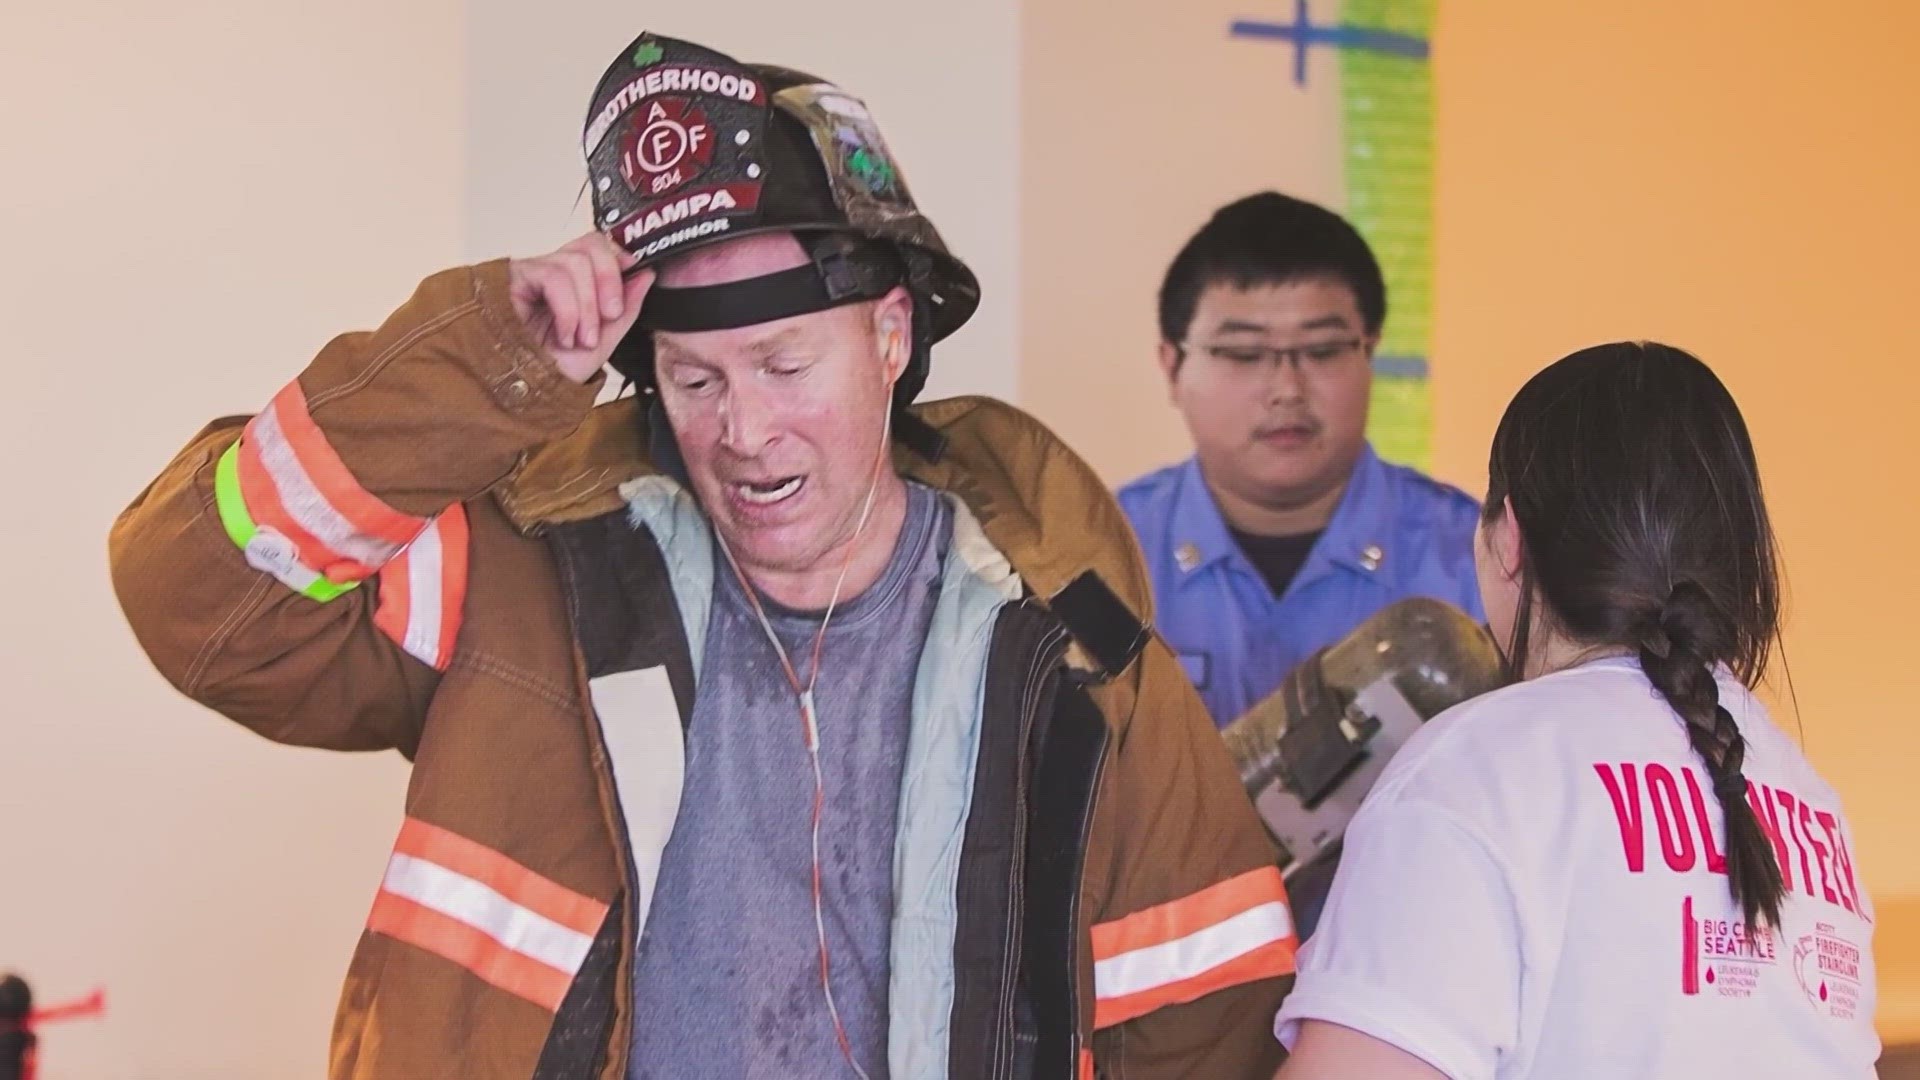 The annual Firefighter Stairclimb has raised more than $28 million since its inception in 1991.